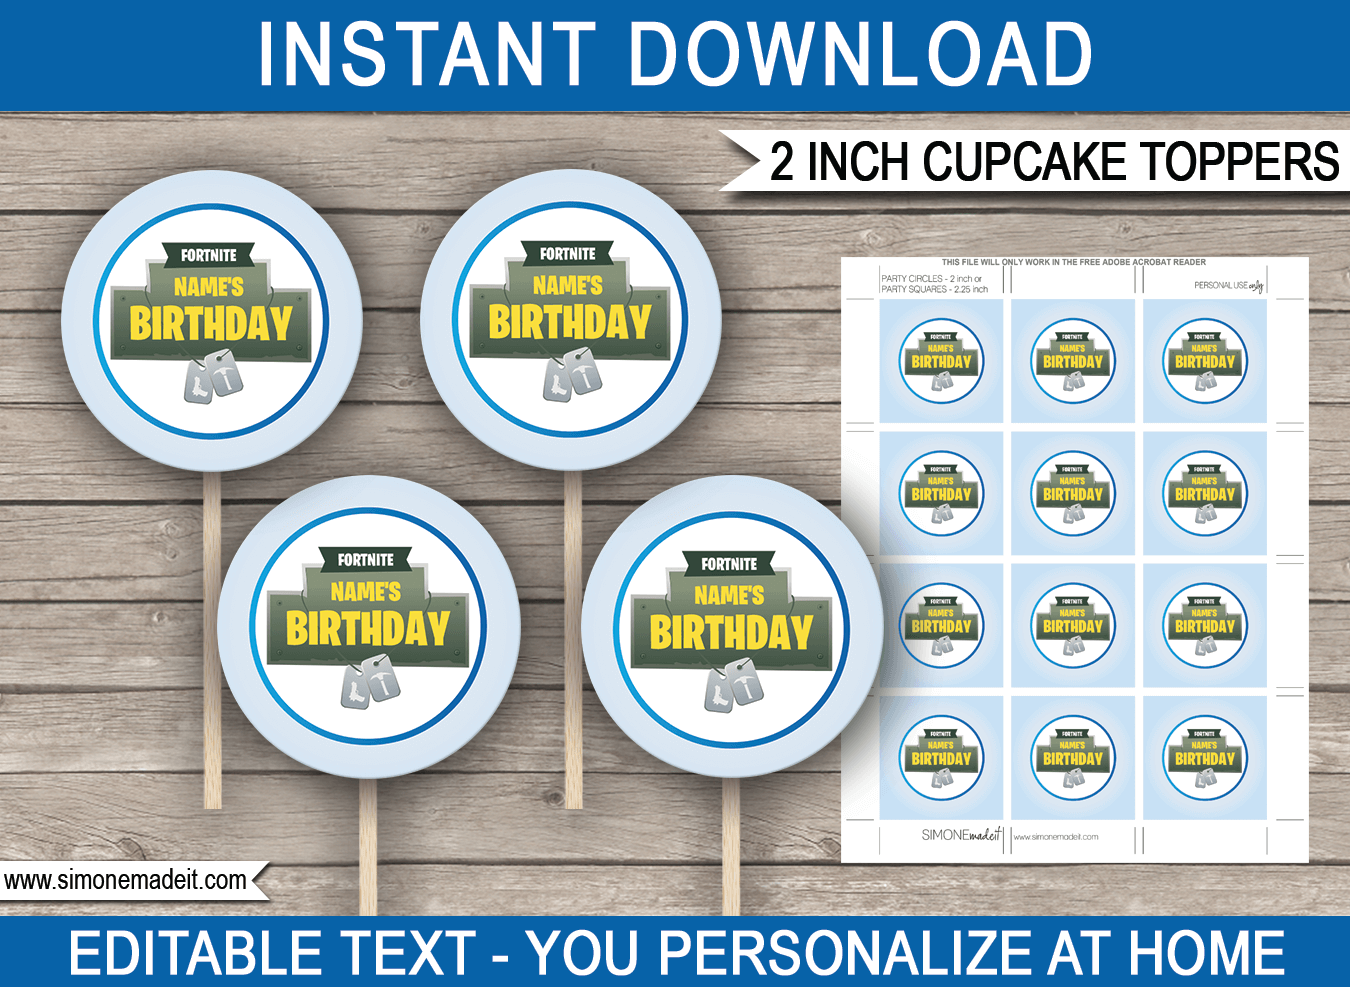 printable fortnite cupcake toppers fortnite birthday party decorations battle royale 2 inch - fortnite birthday party printables free